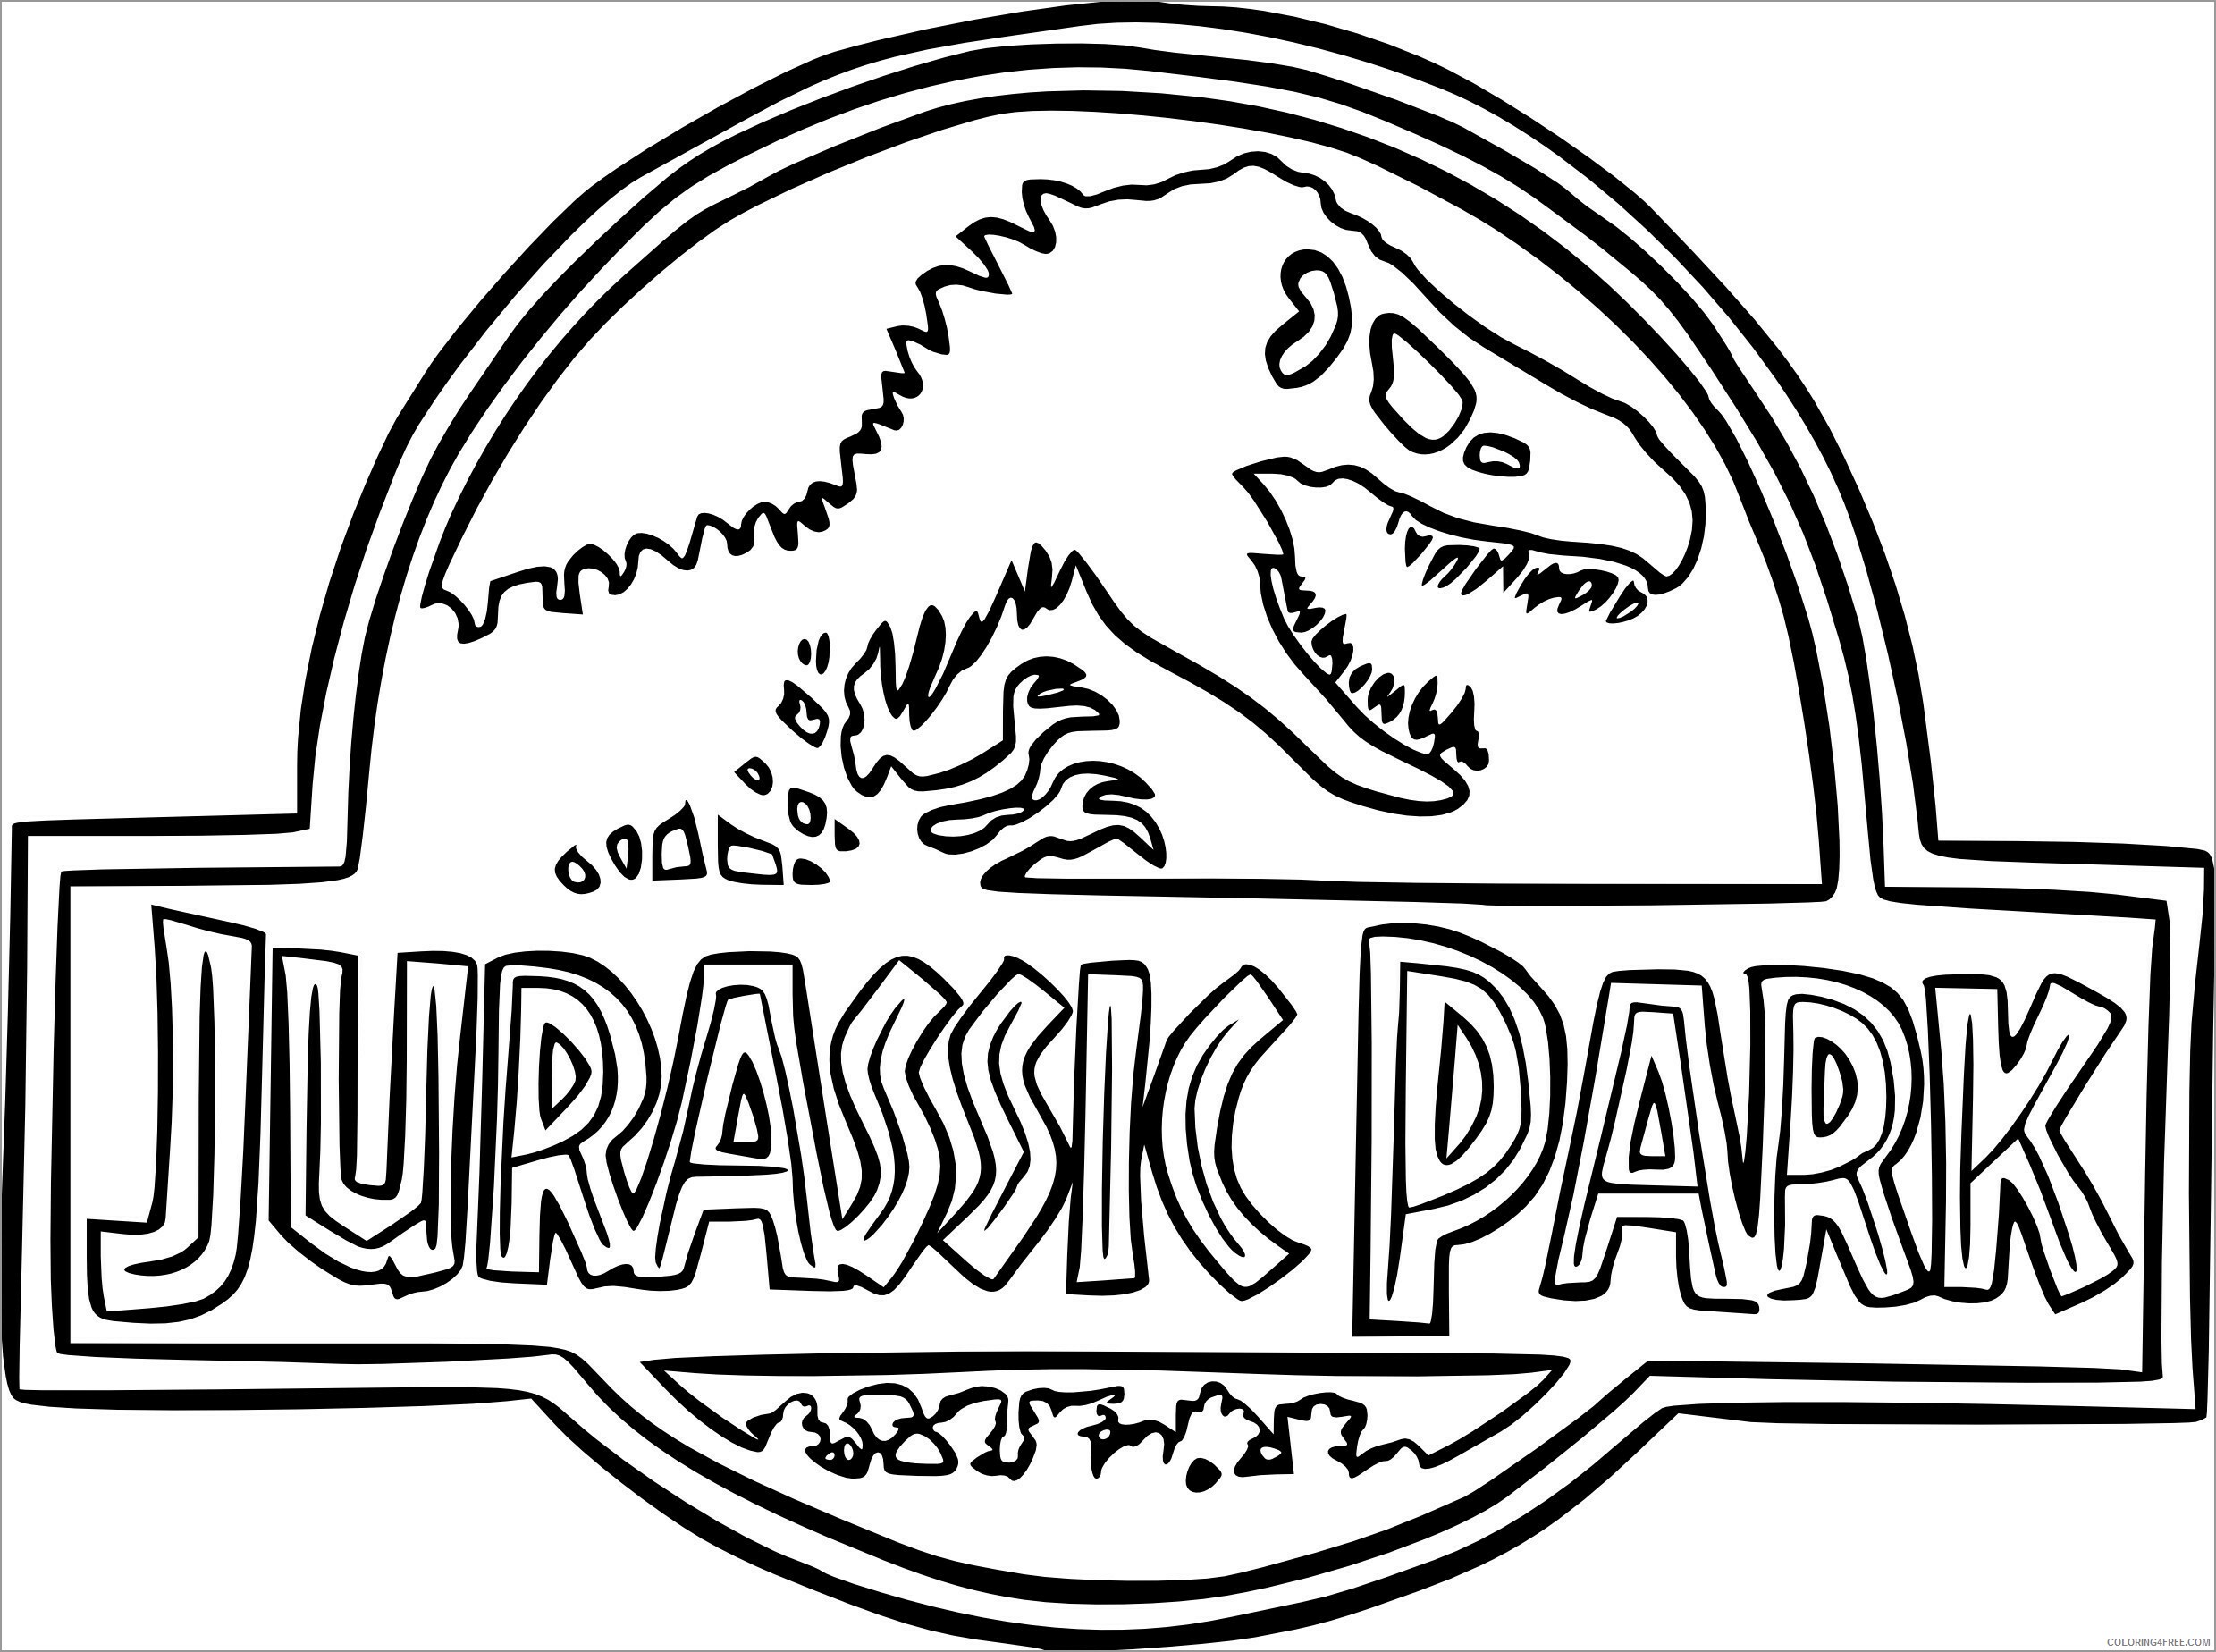 Jurassic World Coloring Pages for boys jurassic park logo Printable